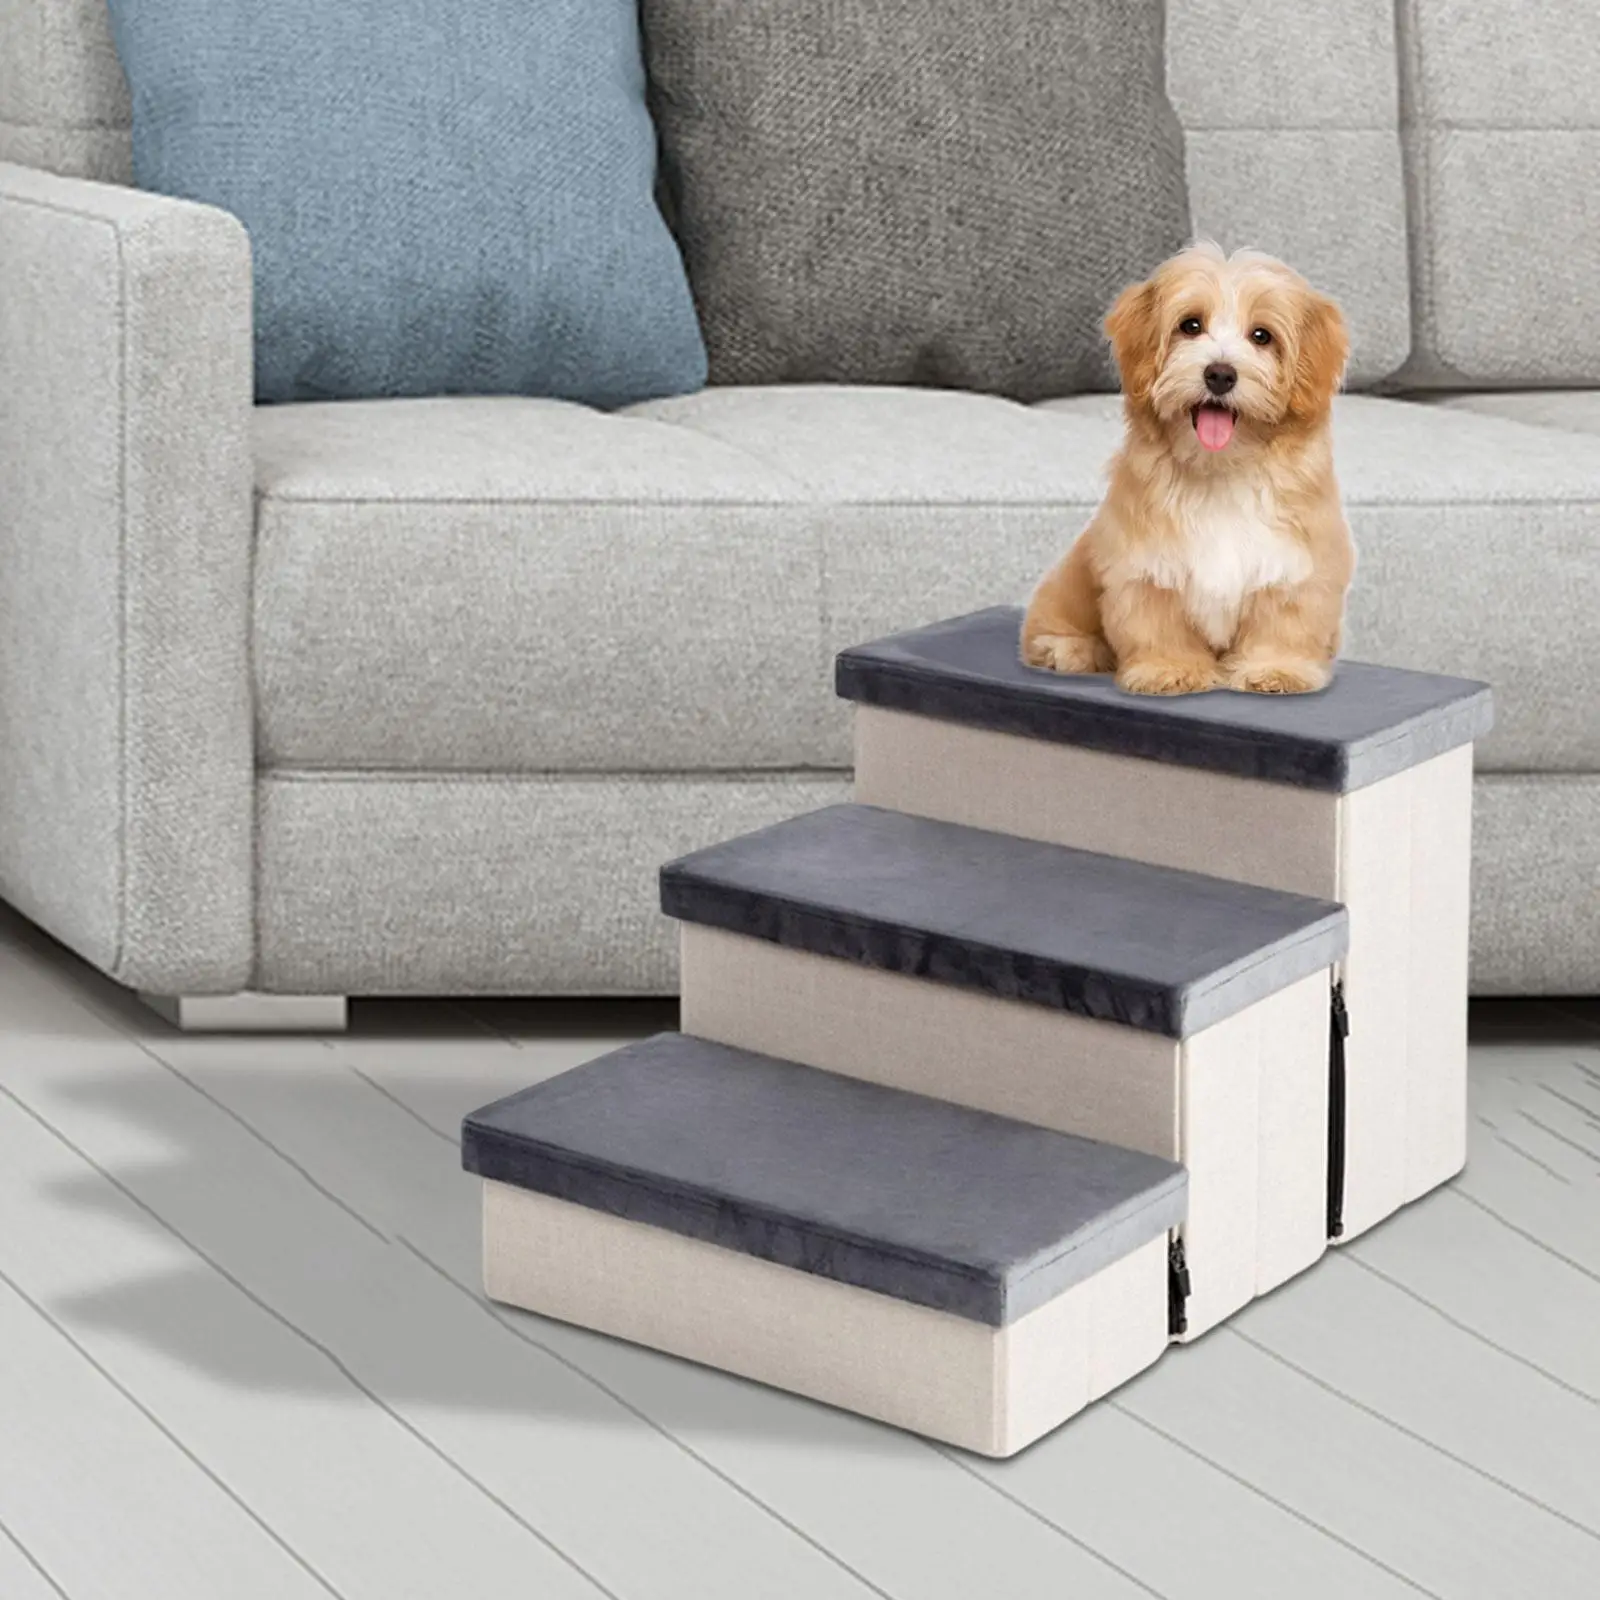 3 Tiers Pet Steps Dog Stairs Removable Cover Pet Climbing Ladder Puppy Toy Storage Box Pet Stairs Ramp for Indoor Couch Bed